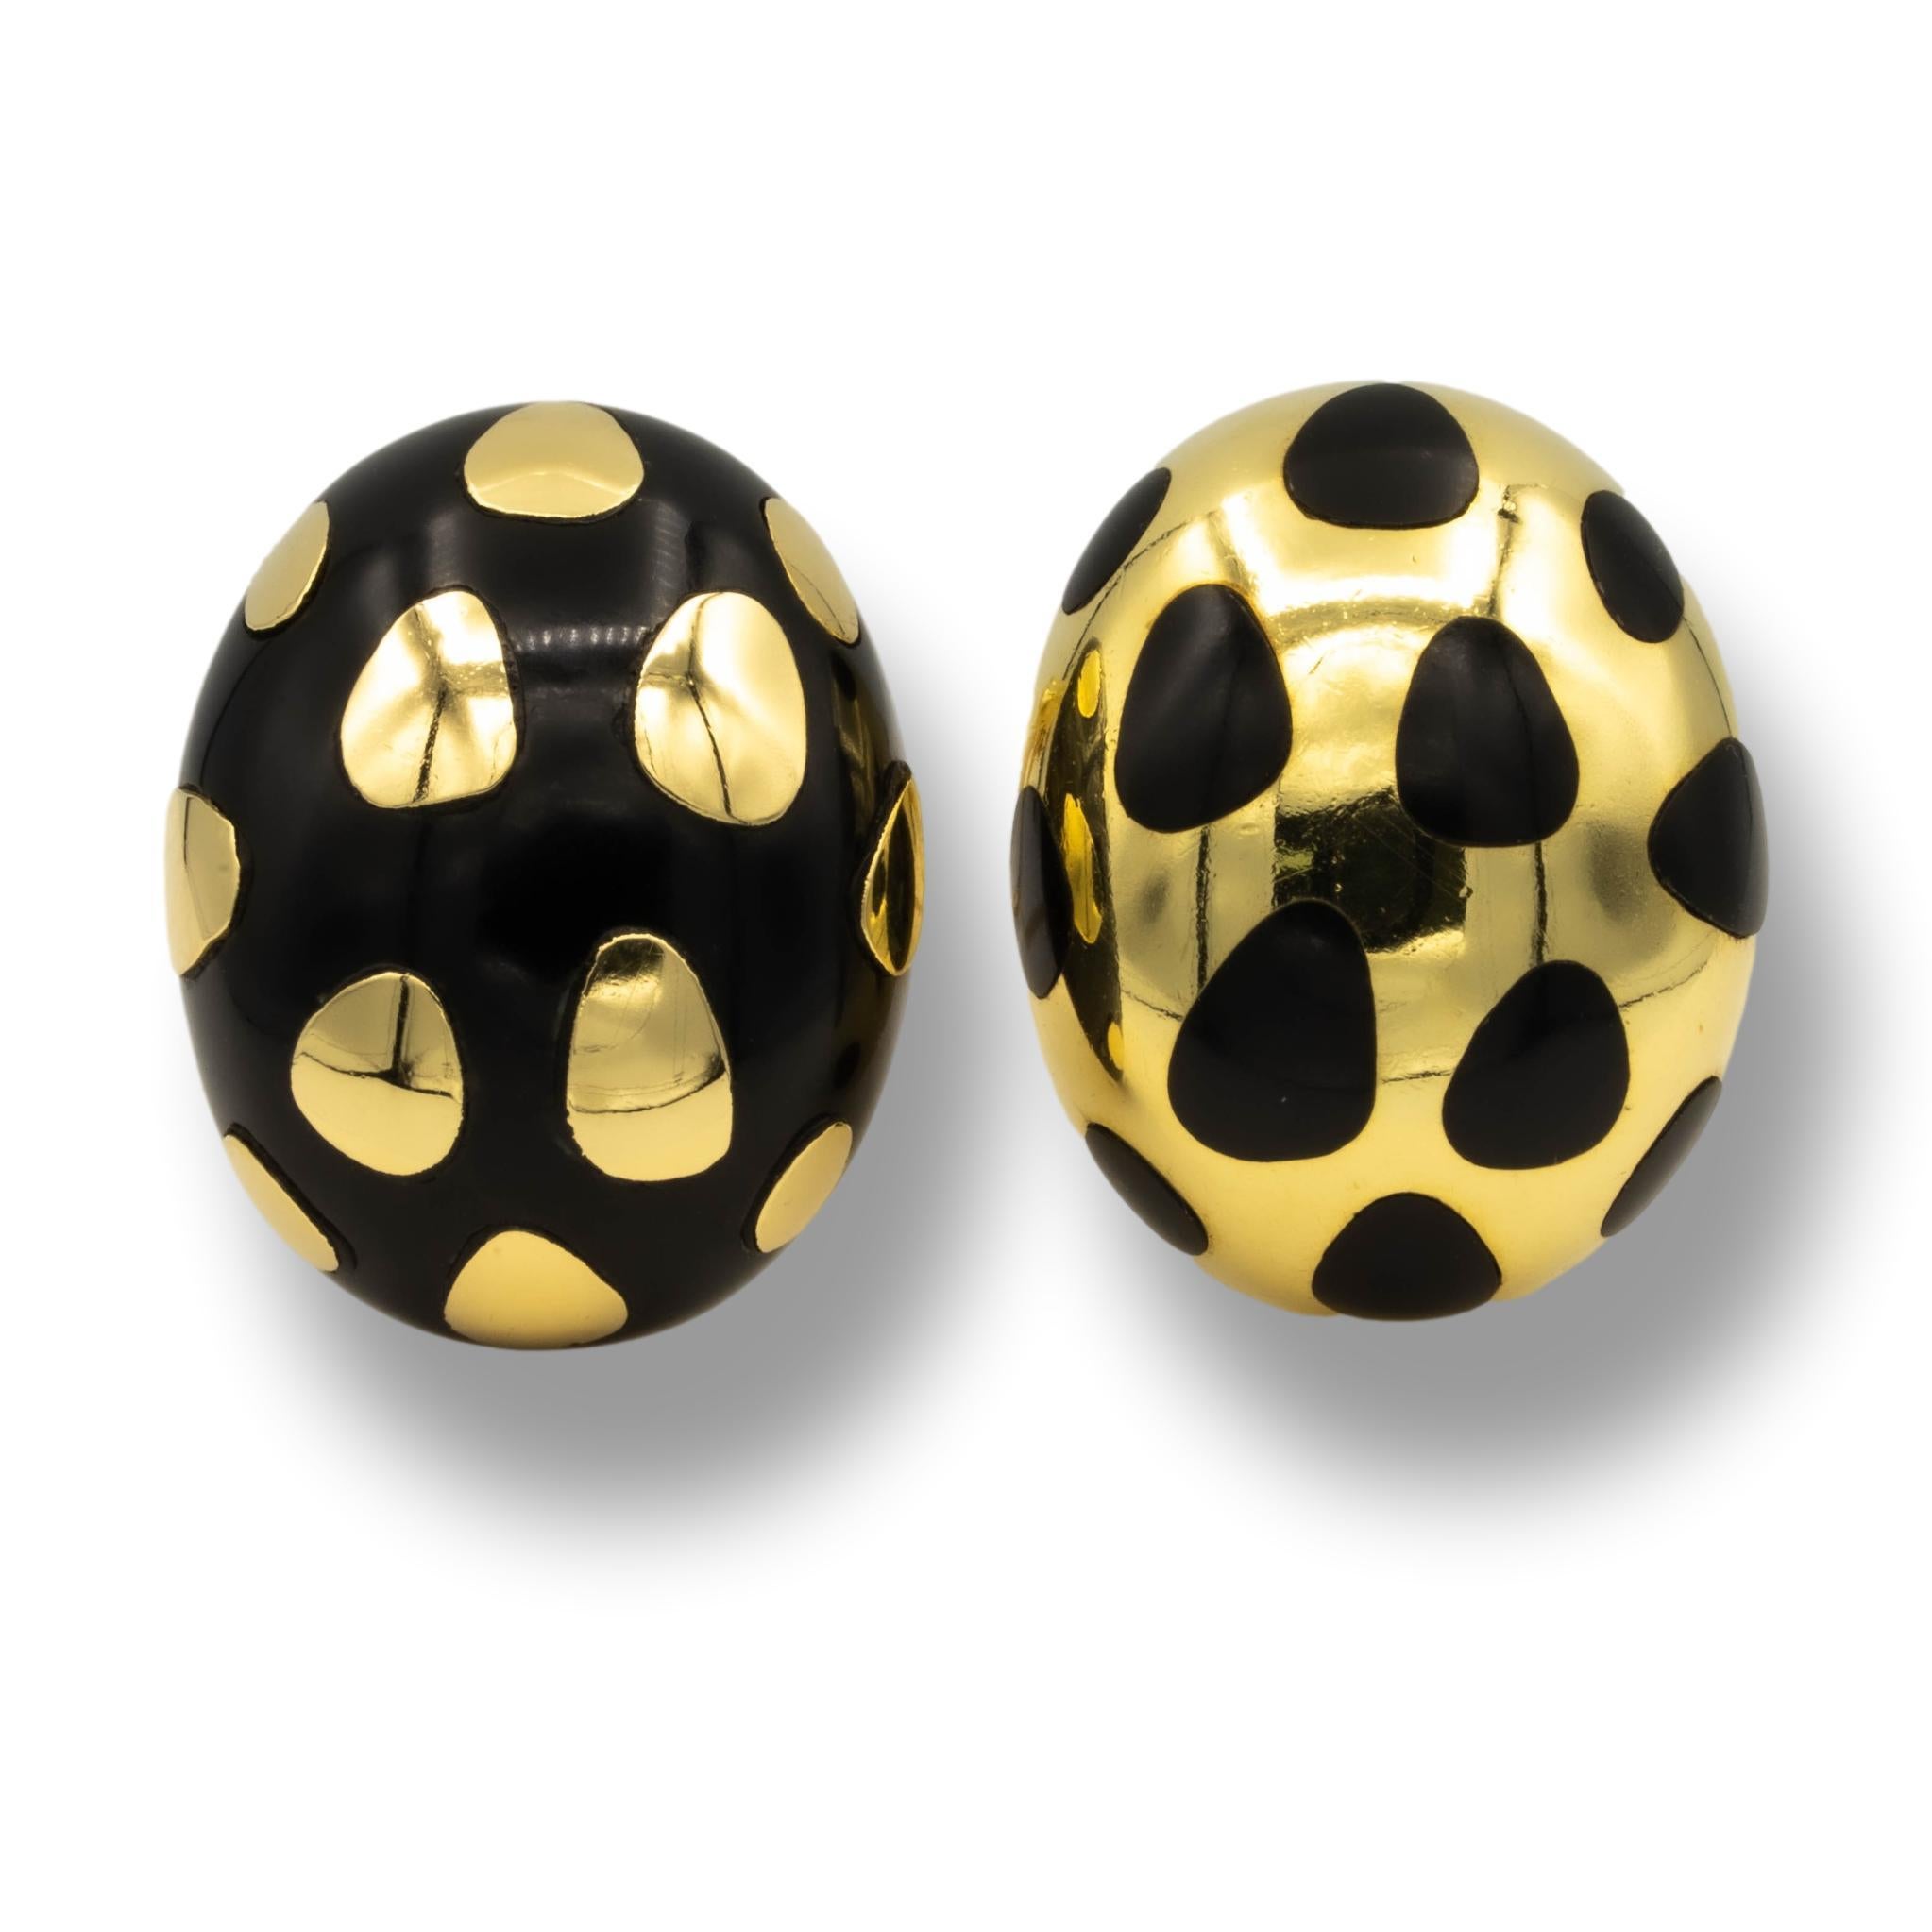 Tiffany & Co. Angela Cummings Positive + Negative - earrings finely crafted in 18 Karat Yellow Gold embellished with multiple free form carvings of natural black jade and gold inlaid into the surface of gold and black jade . These earrings are